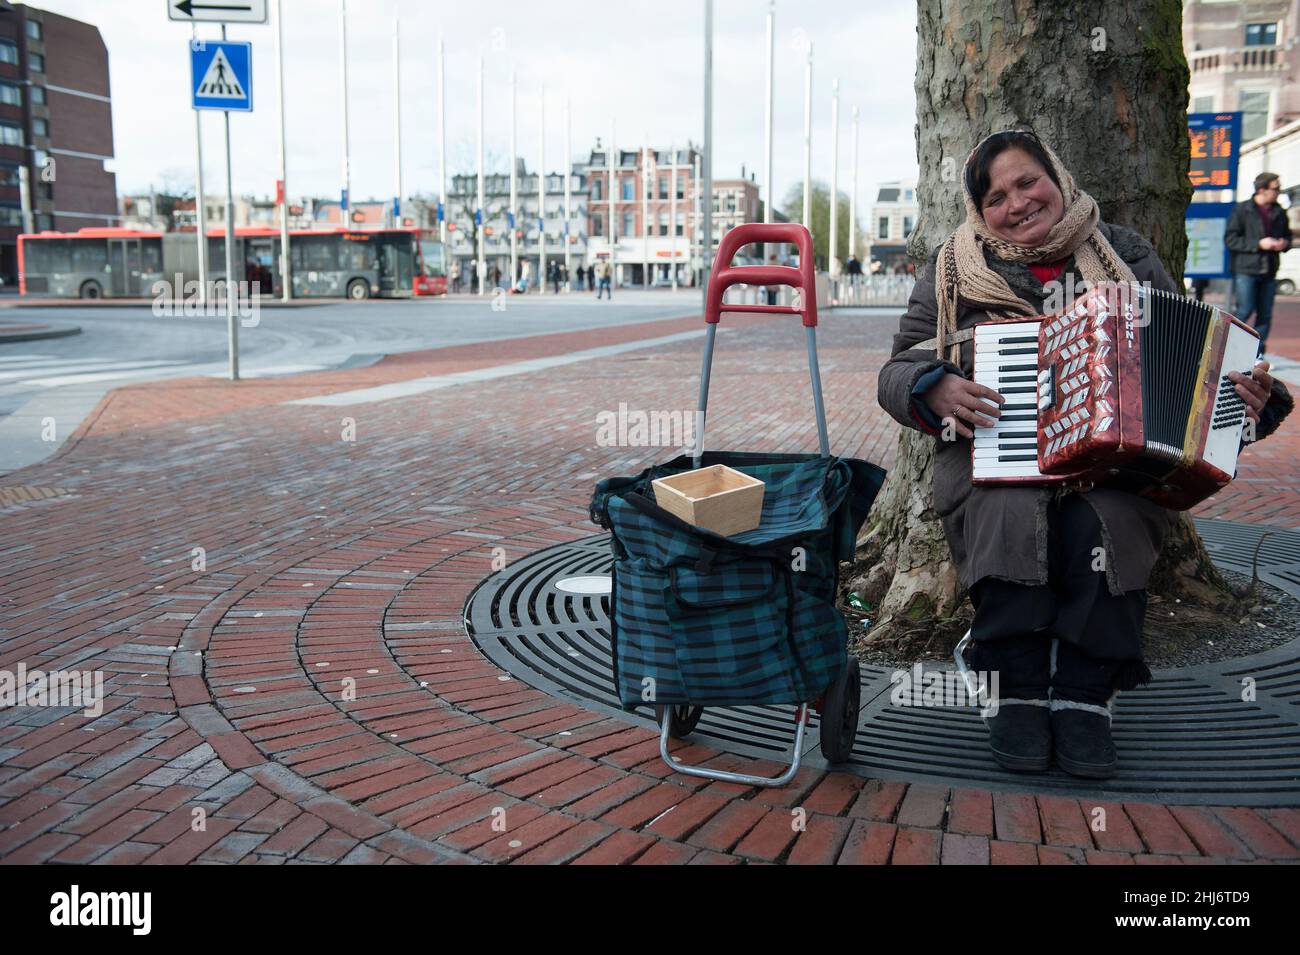 Haarlem, Netherlands. Roma woman playing her accordion at a railway station square to earn a buck or two a day. Roma men and women are en masse transported to Western European Countries to earn tips and scraps of money in various ways to support their lives in poverty and the Huma Trafficking Groups that bring them to the West. Stock Photo